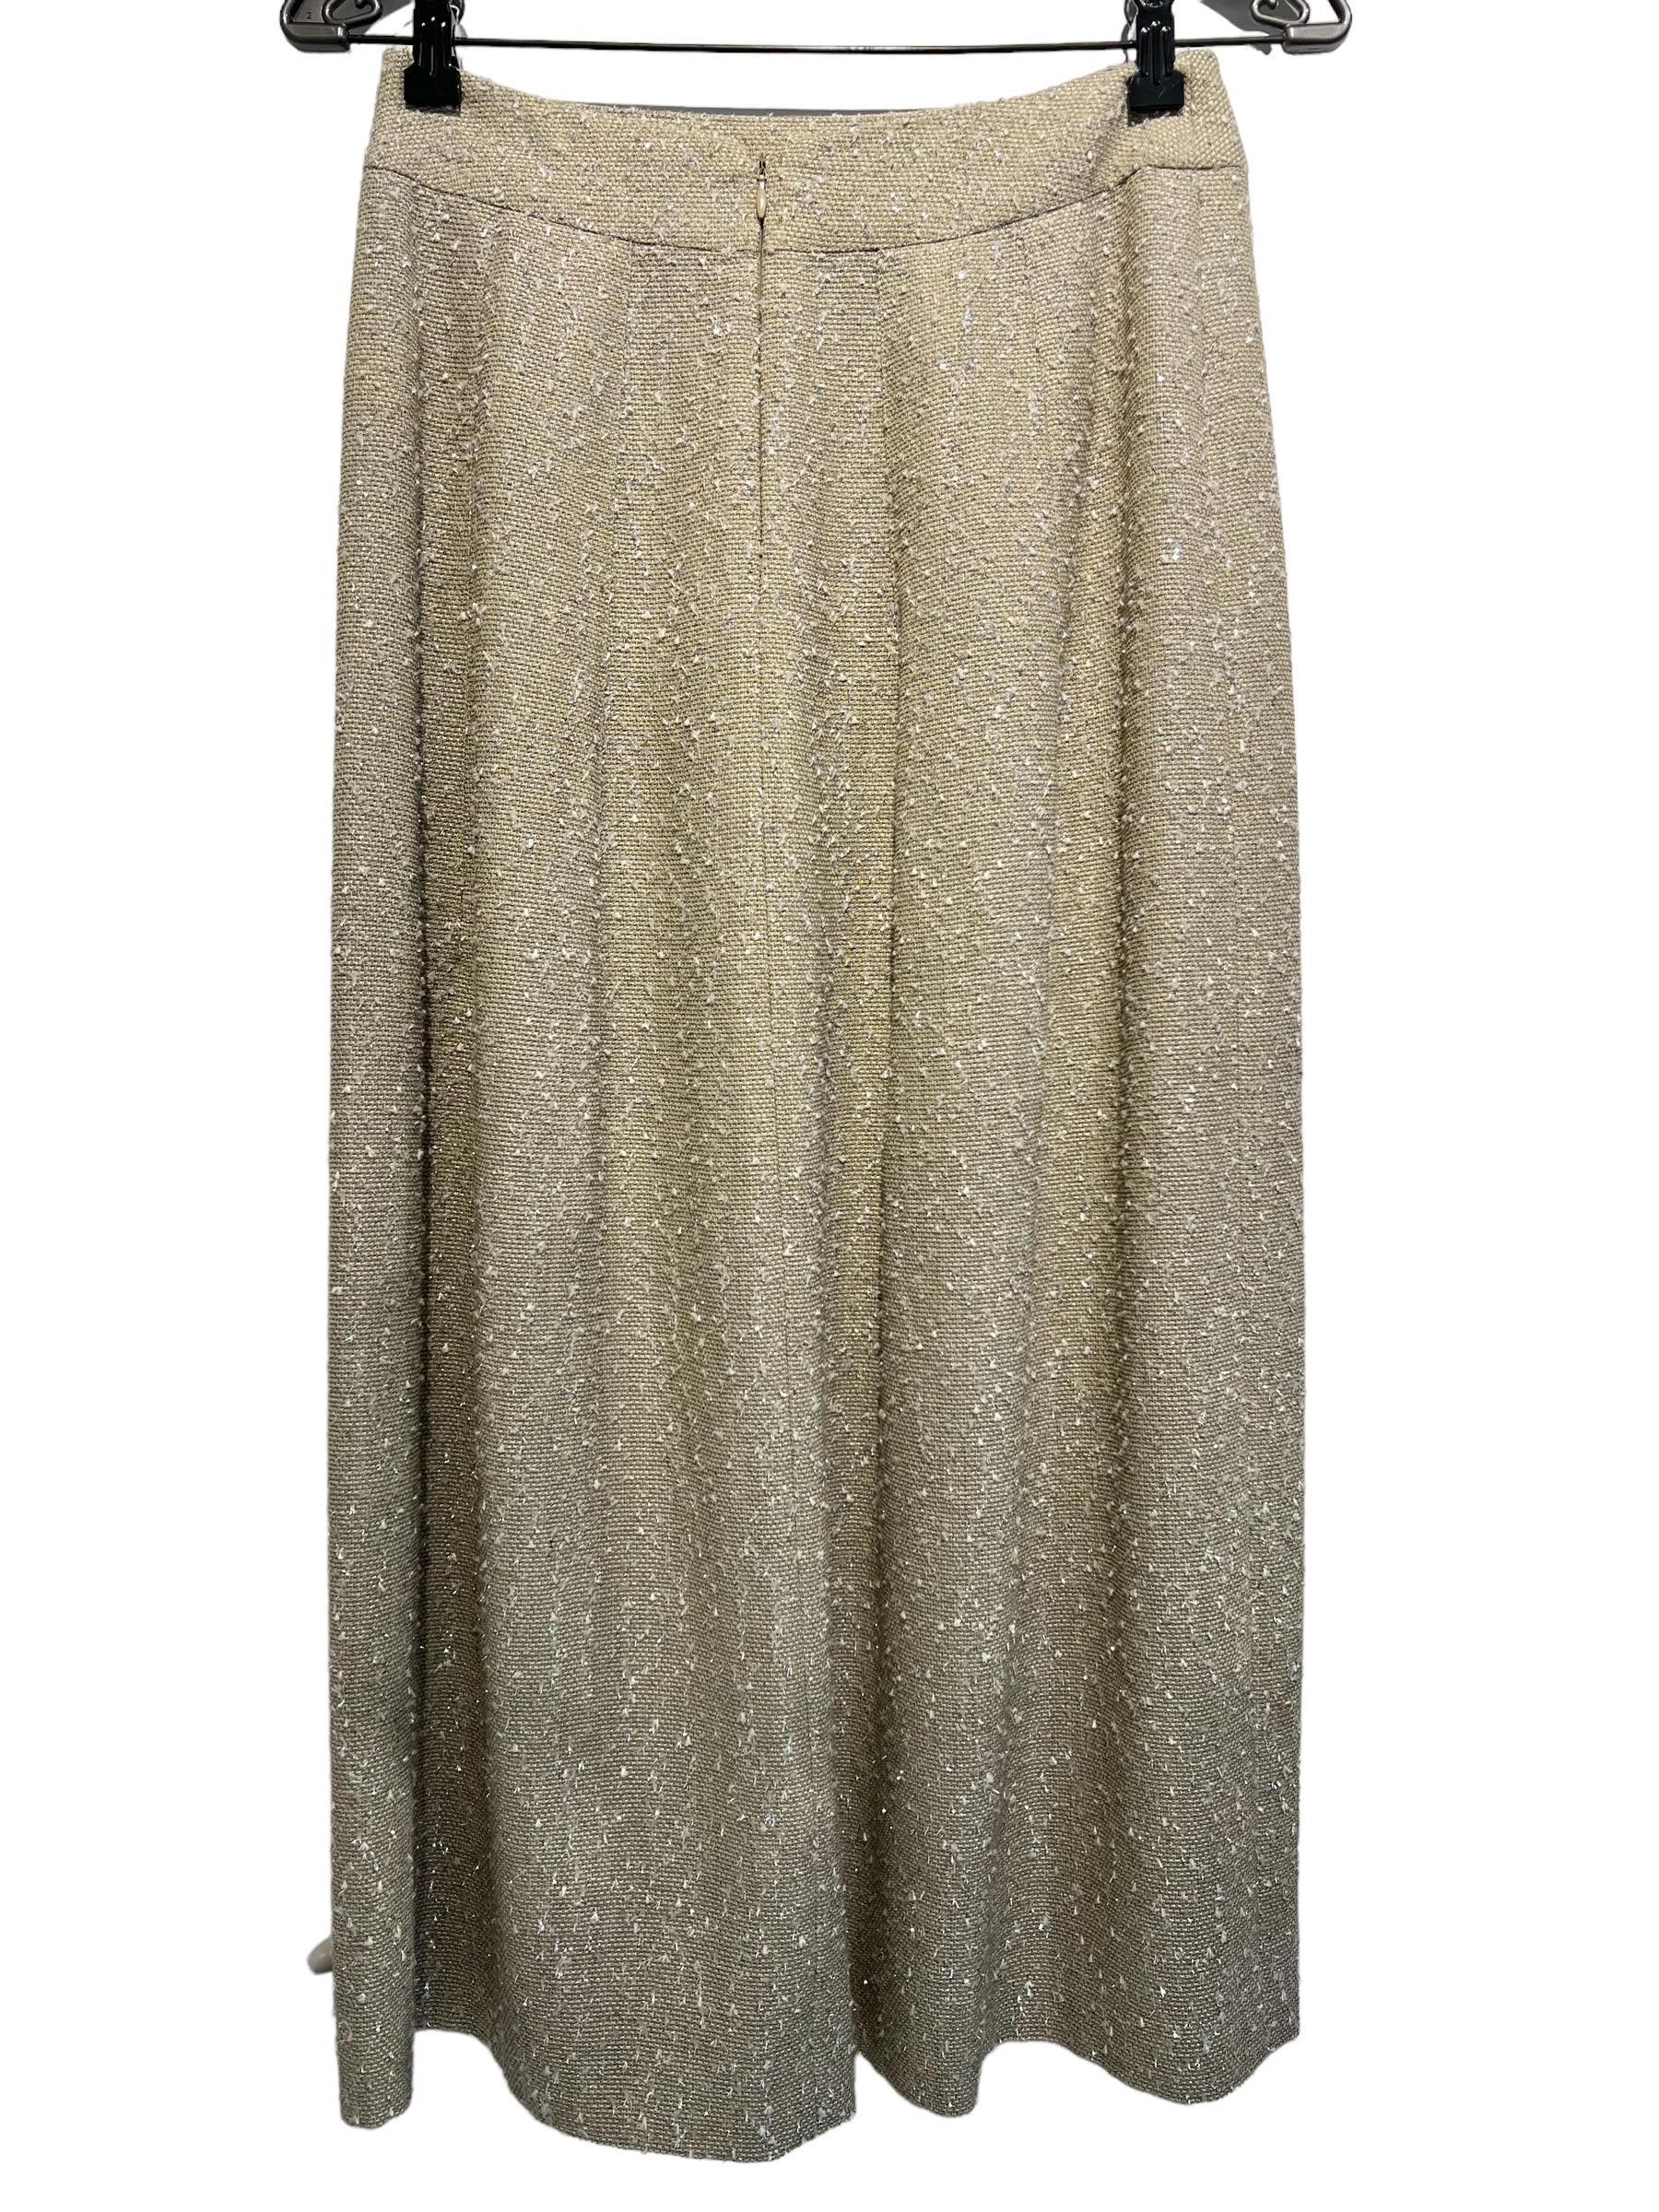 Chanel Taupe 3/4 Length Wool Tweed Skirt With Back Zipper